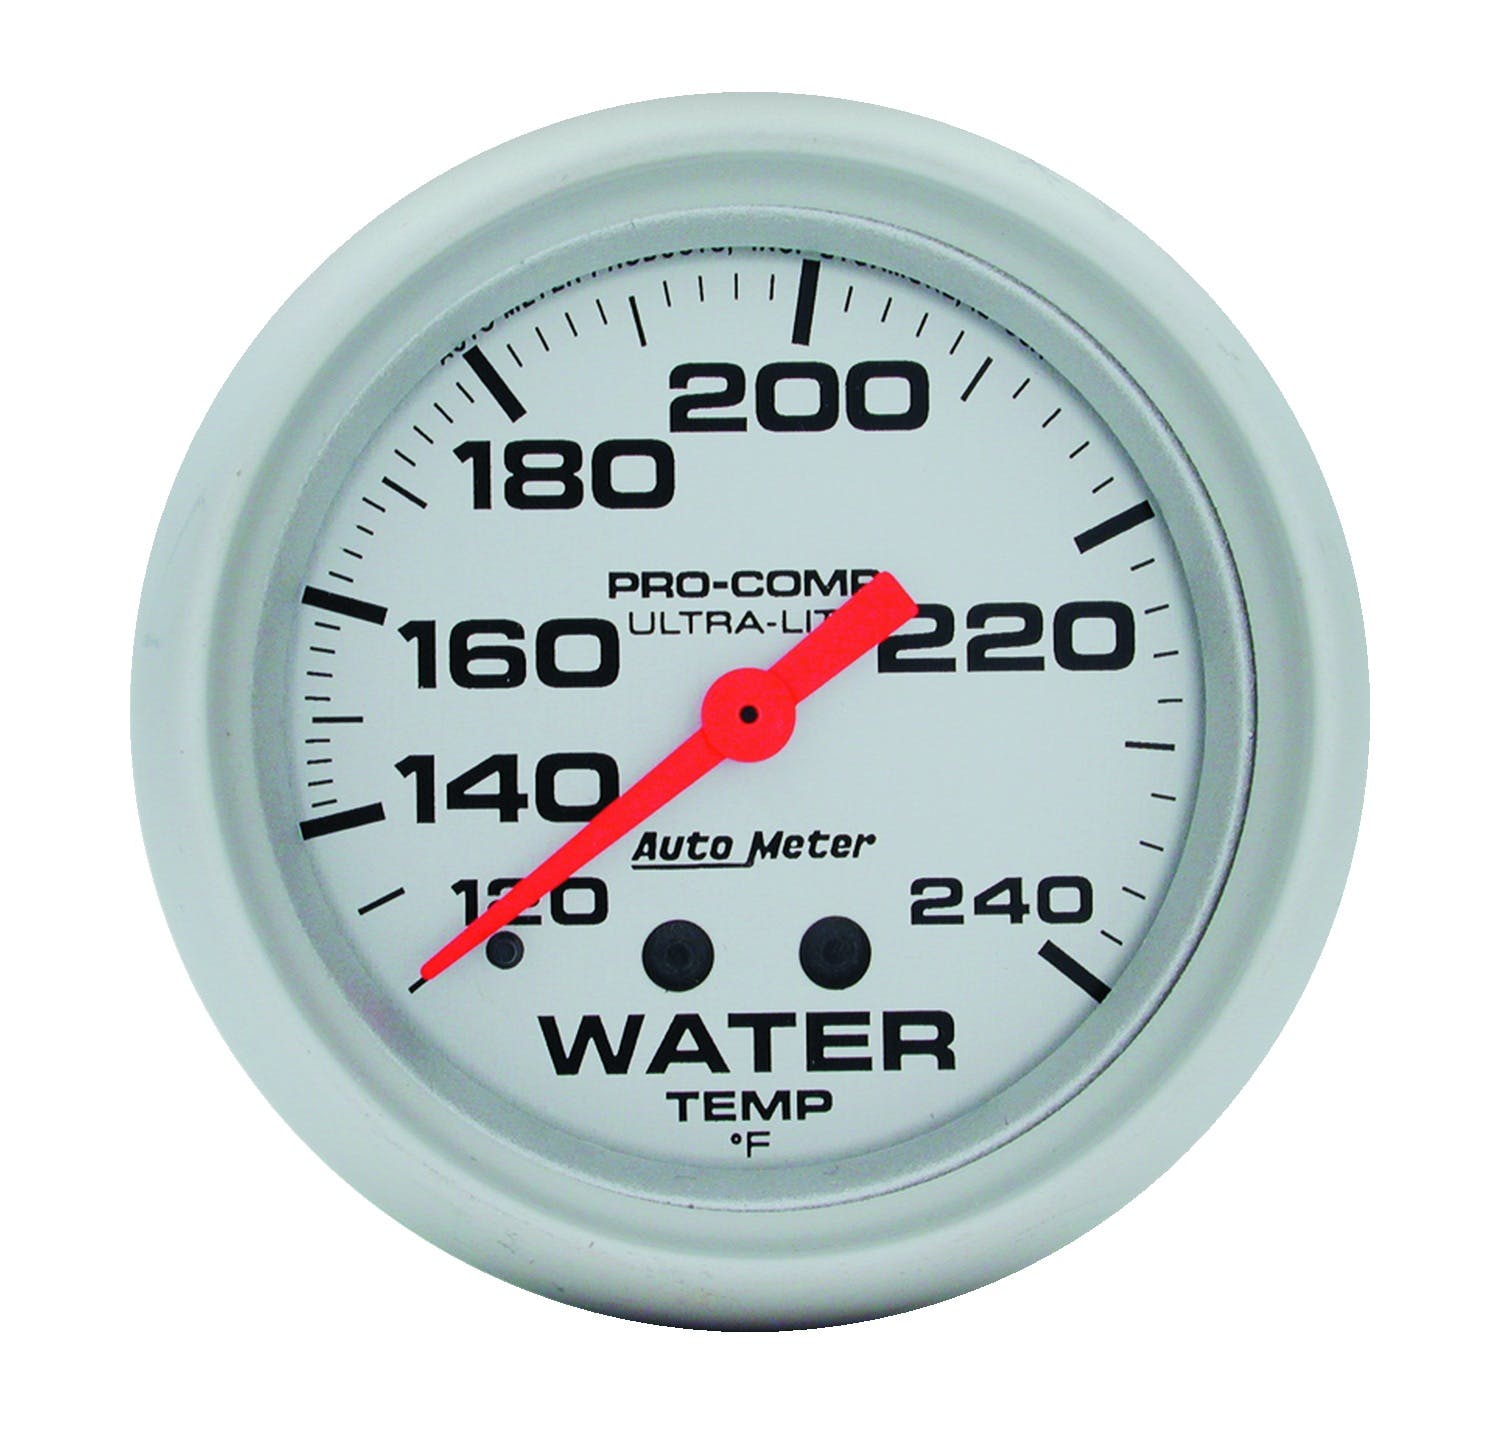 AutoMeter Products 4432 Water Temp 120-240 F